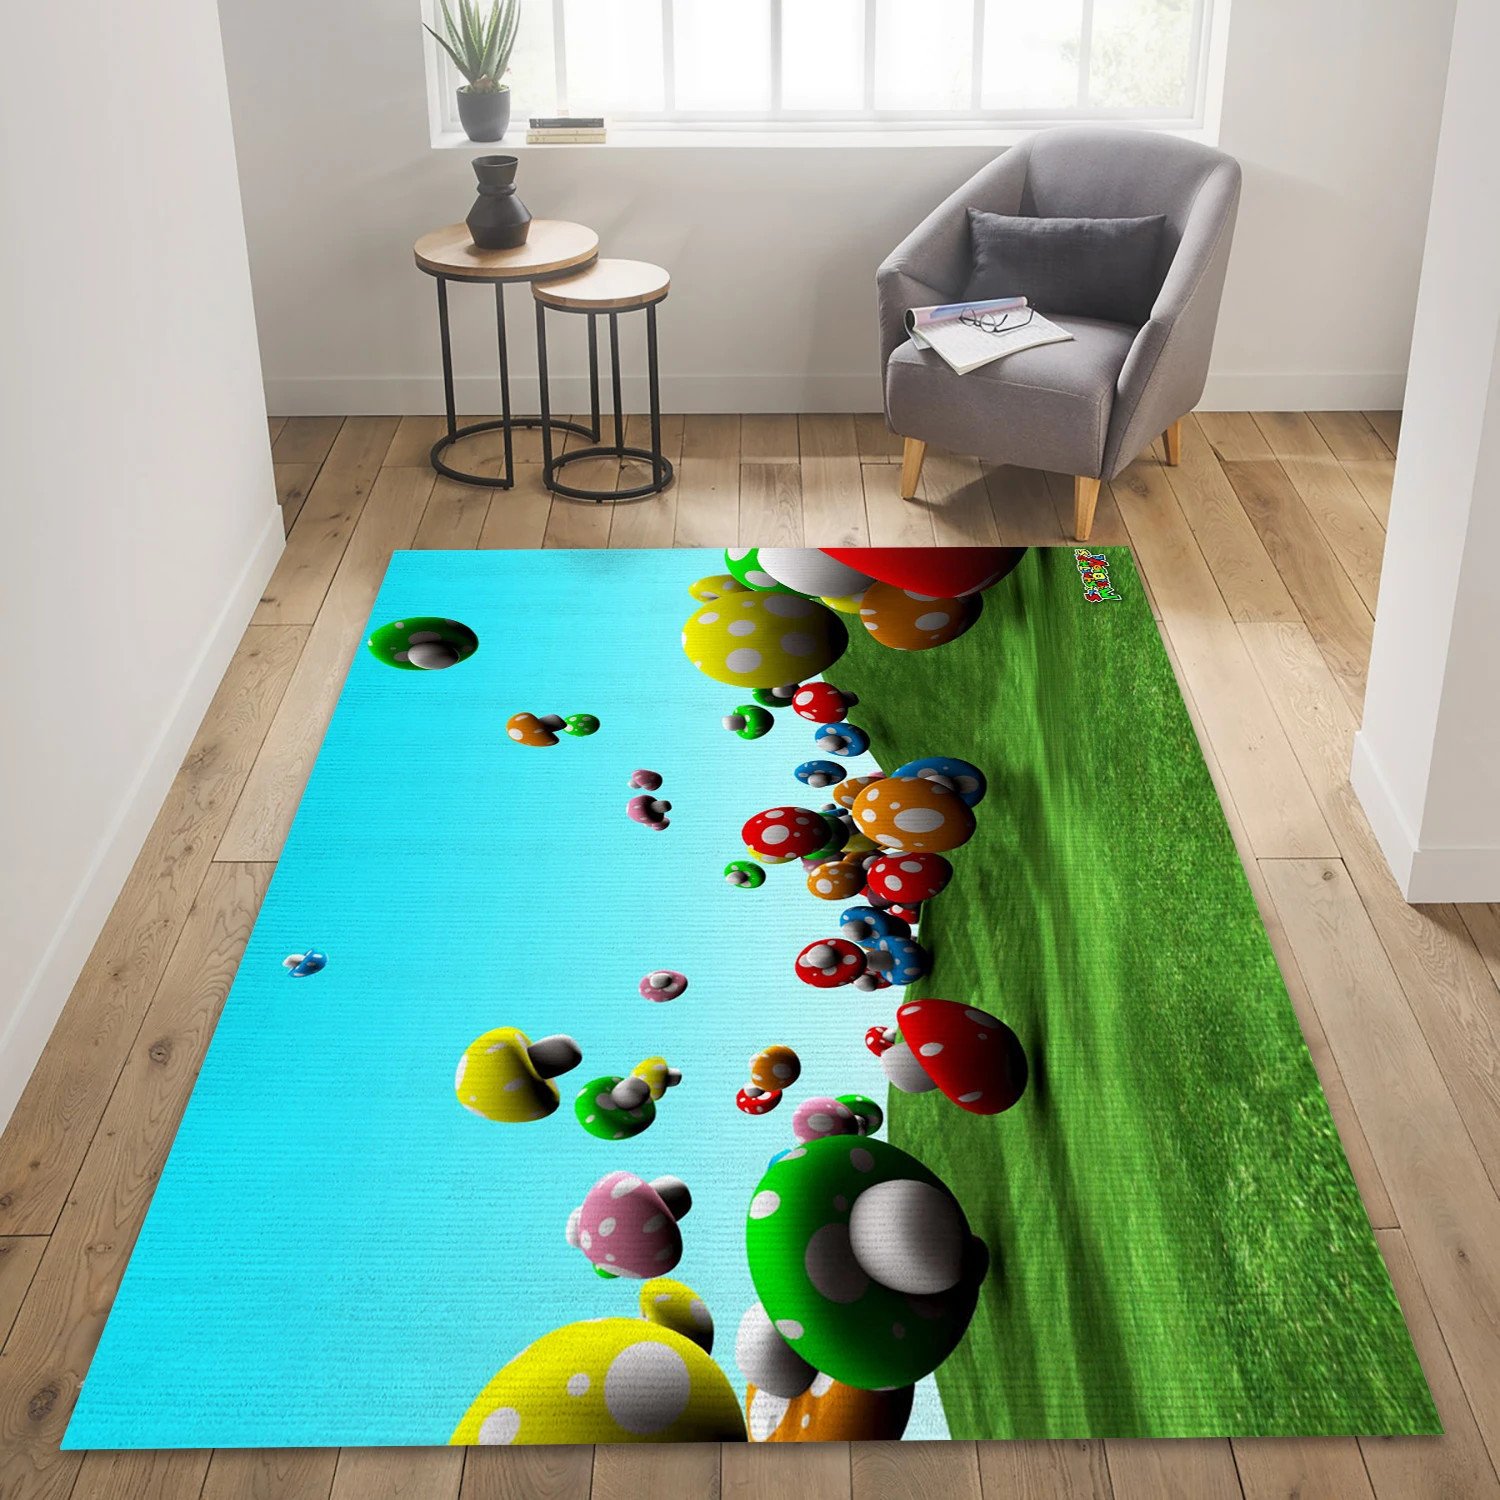 Mario Video Game Area Rug For Christmas, Bedroom Rug - Christmas Gift Decor - Indoor Outdoor Rugs 2